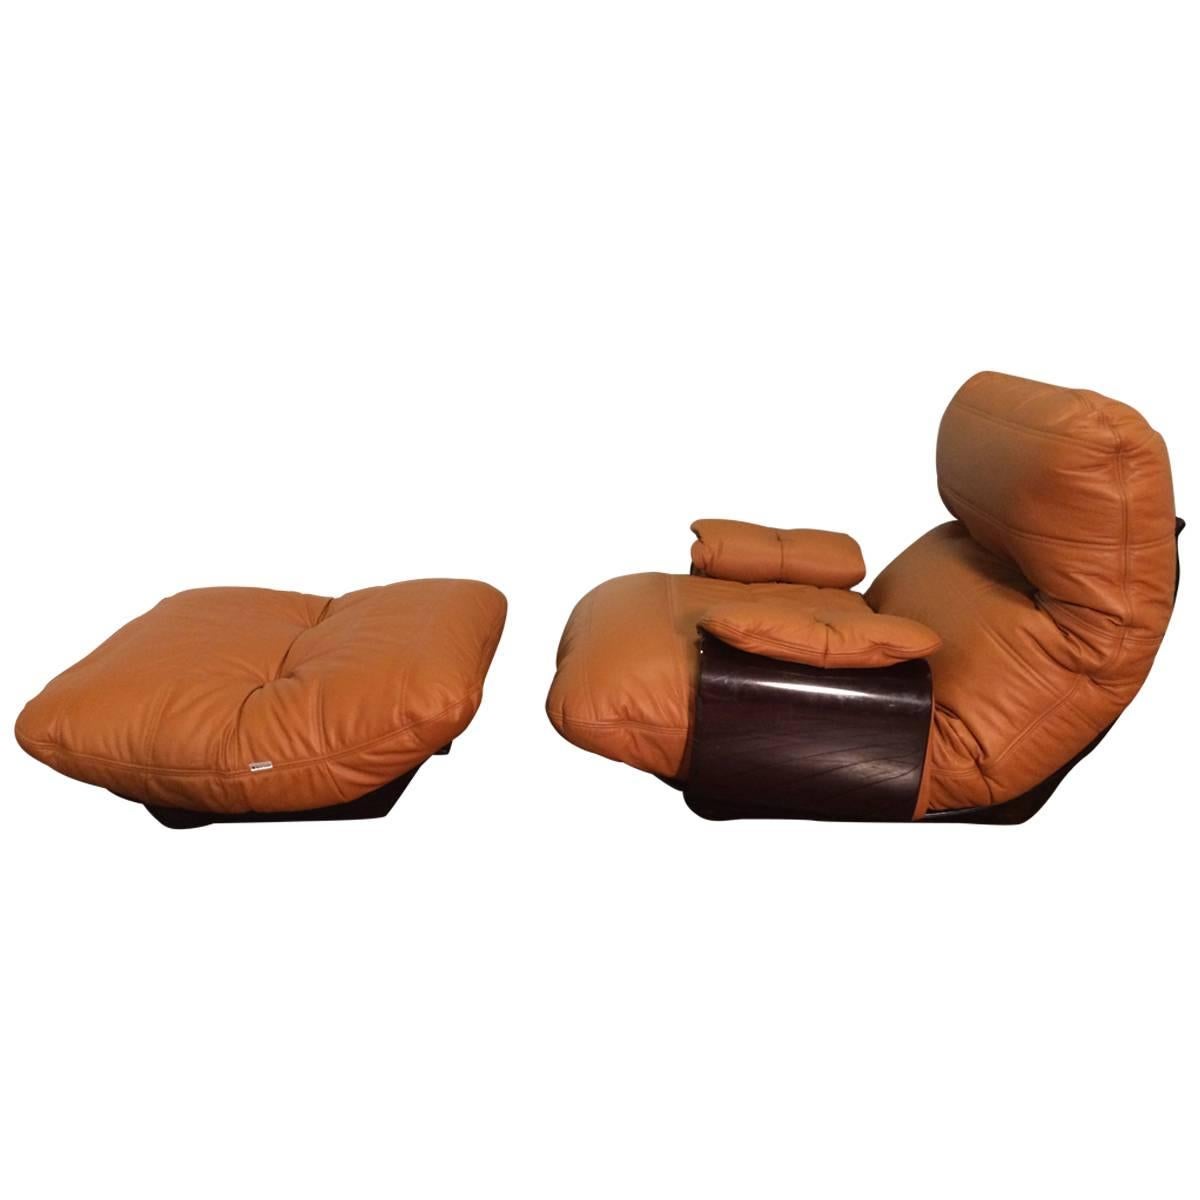 Cognac Leather Marsala Lounge Chair and Pouf by Michel Ducaroy for Ligne Roset For Sale